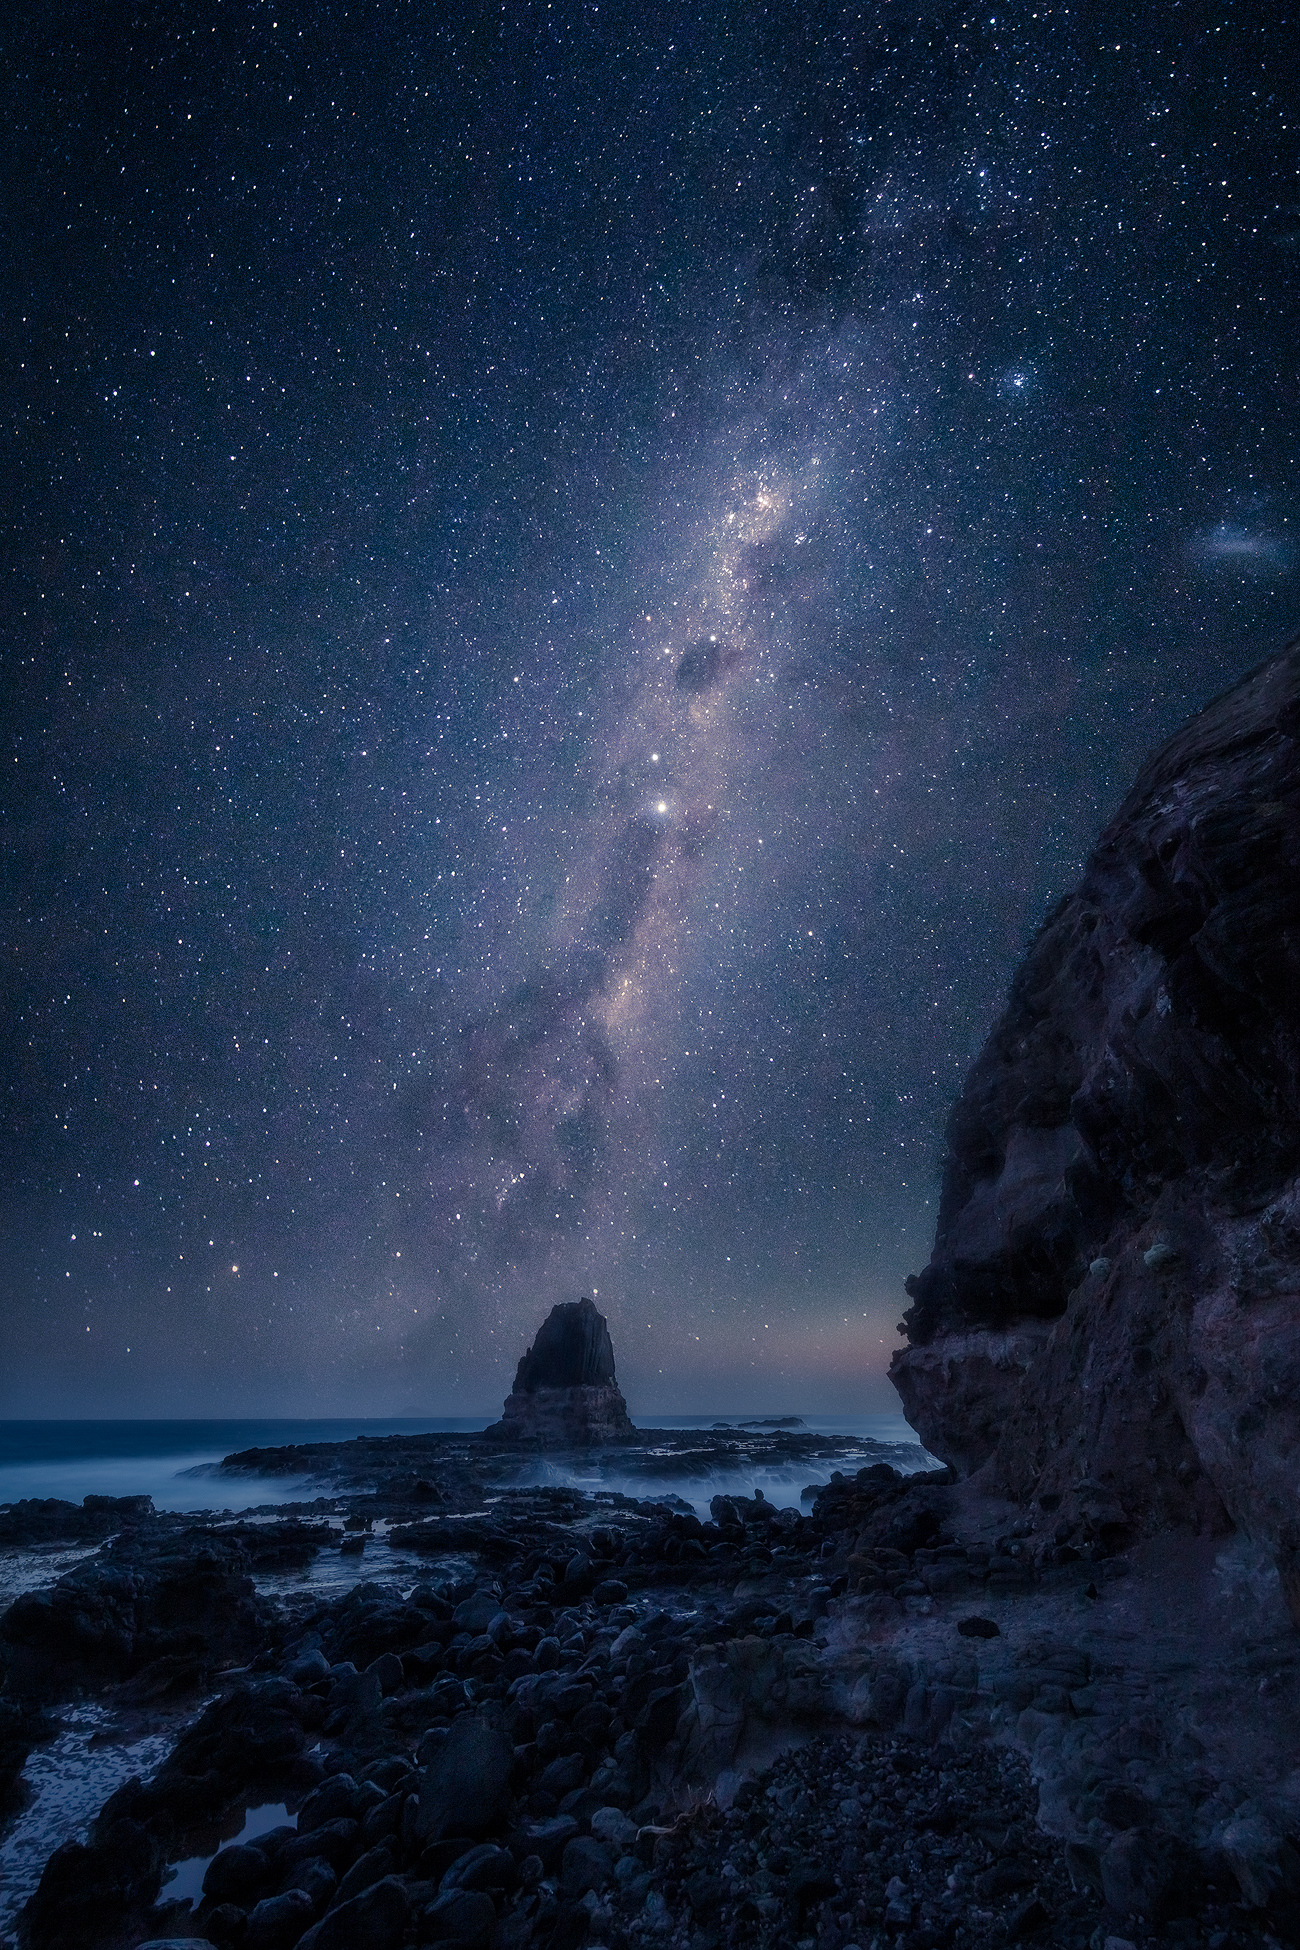 Astrophotography Workshop | Night Sky Milky Way Cape Schanck Pulpit Rock Melbourne Australia | WeAreRawPhotography courses, tours and workshops in Australia